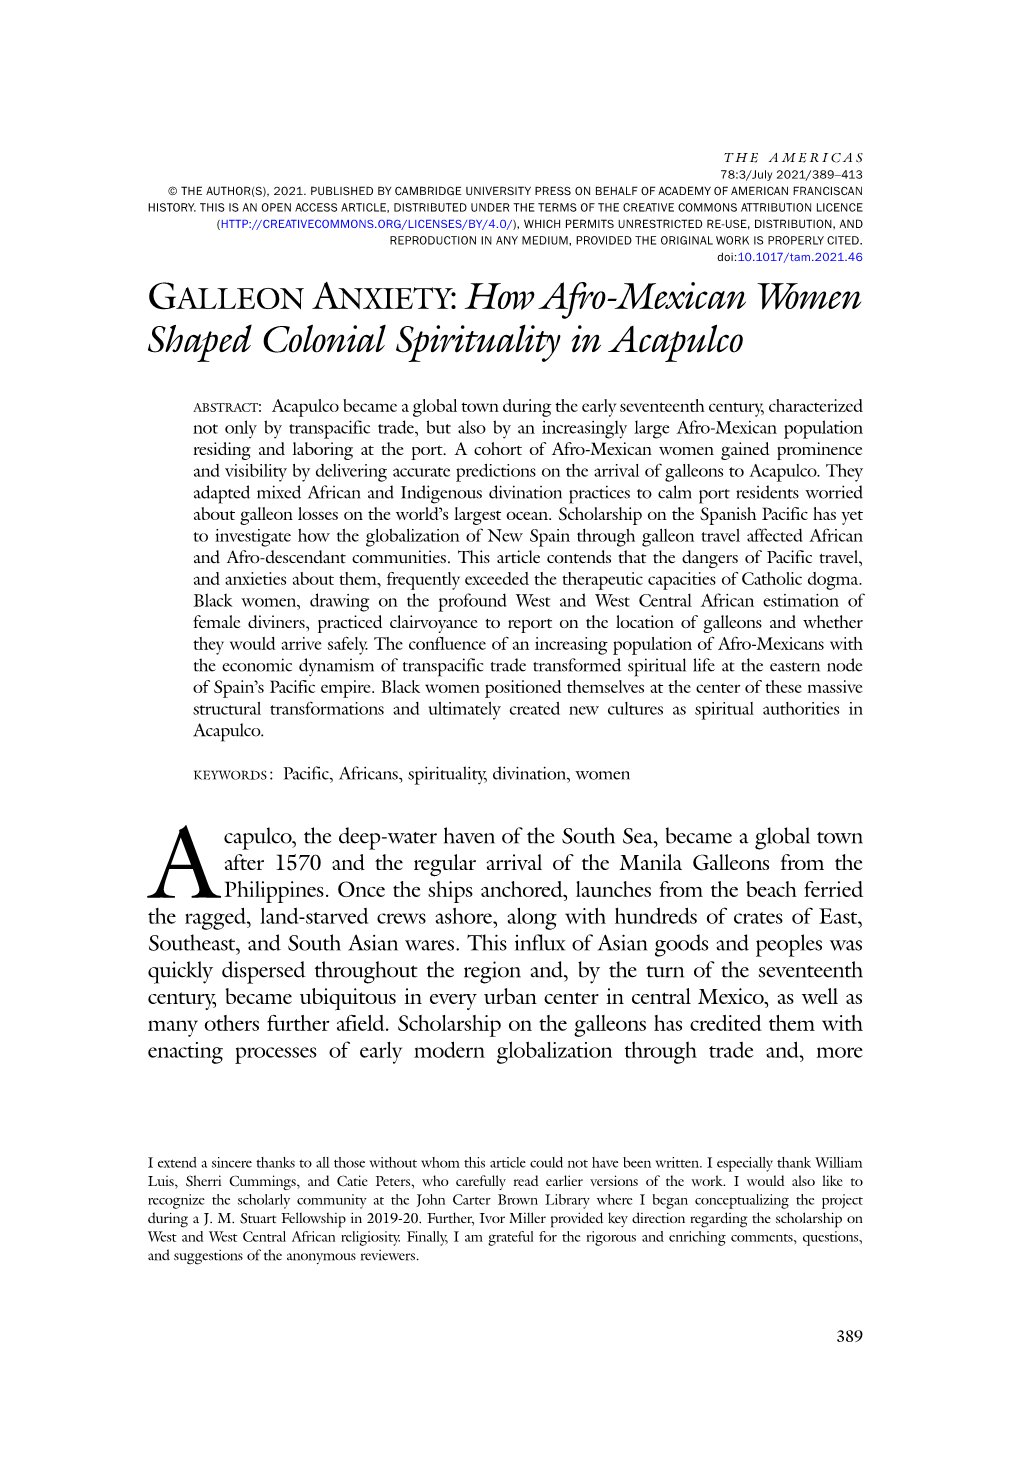 GALLEON ANXIETY: How Afro-Mexican Women Shaped Colonial Spirituality in Acapulco